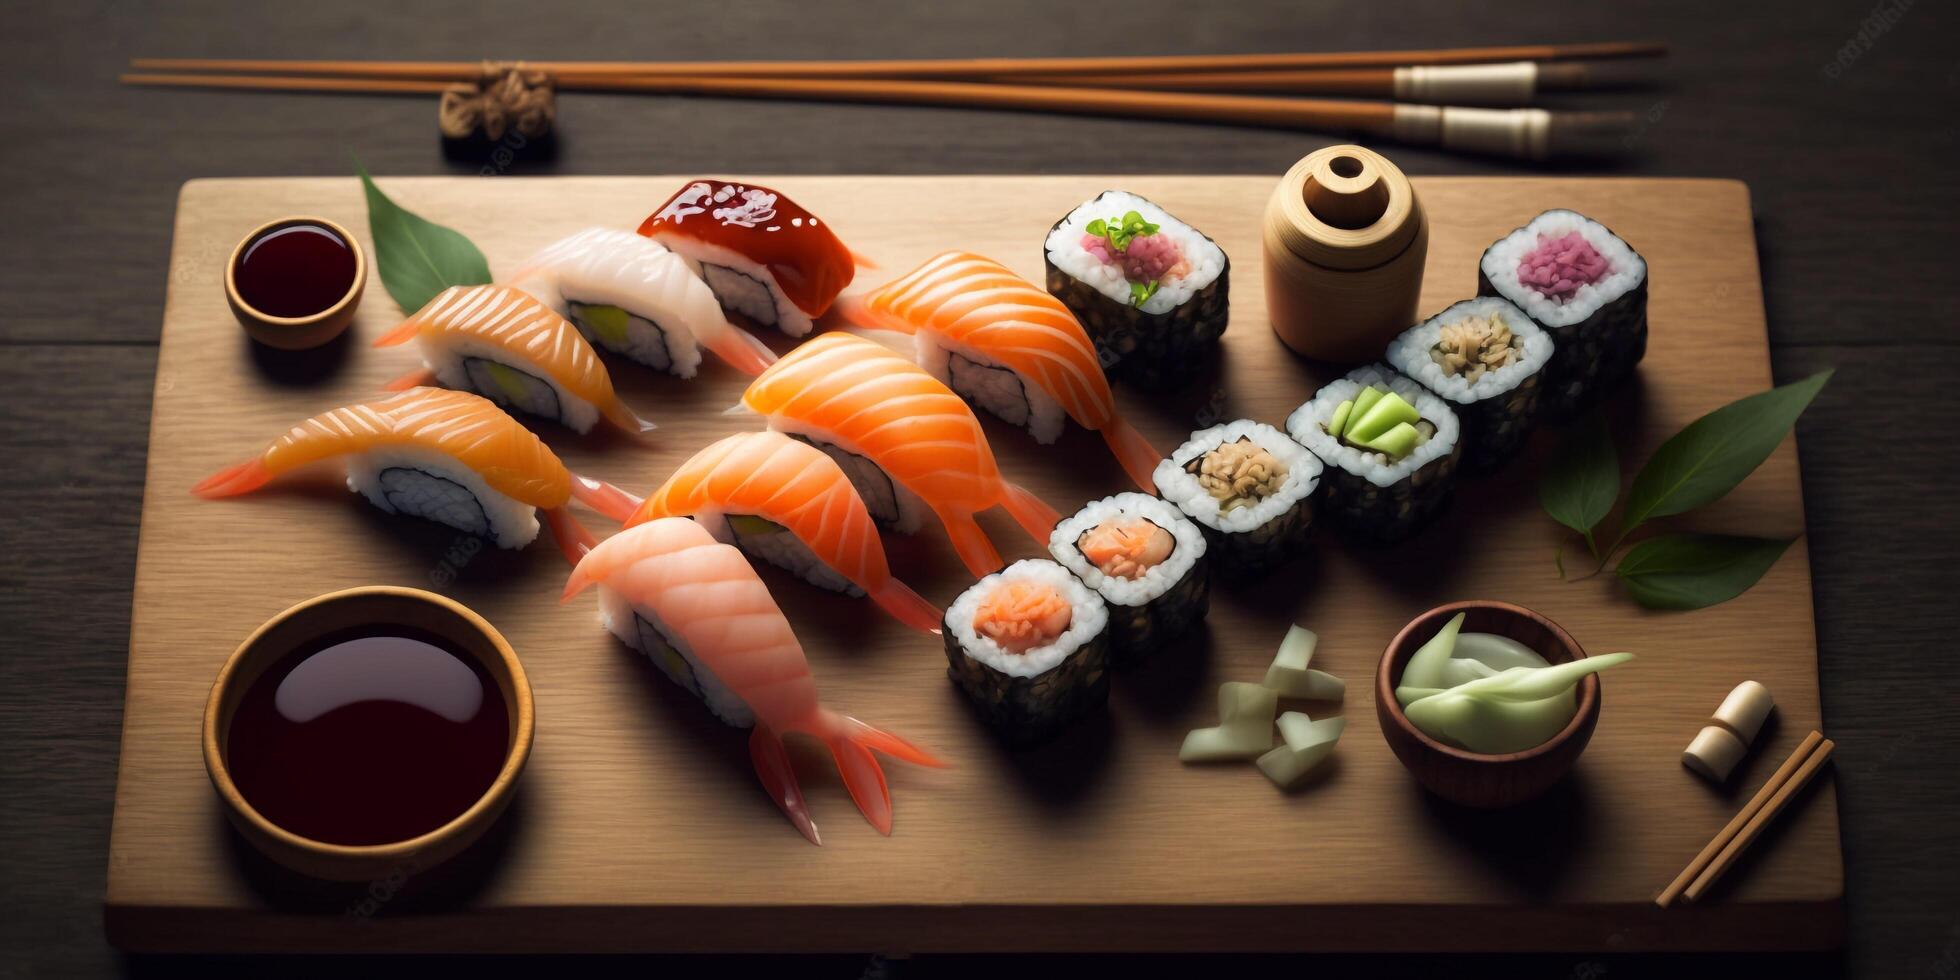 The Japanese Sushi set on the wood plate with . photo